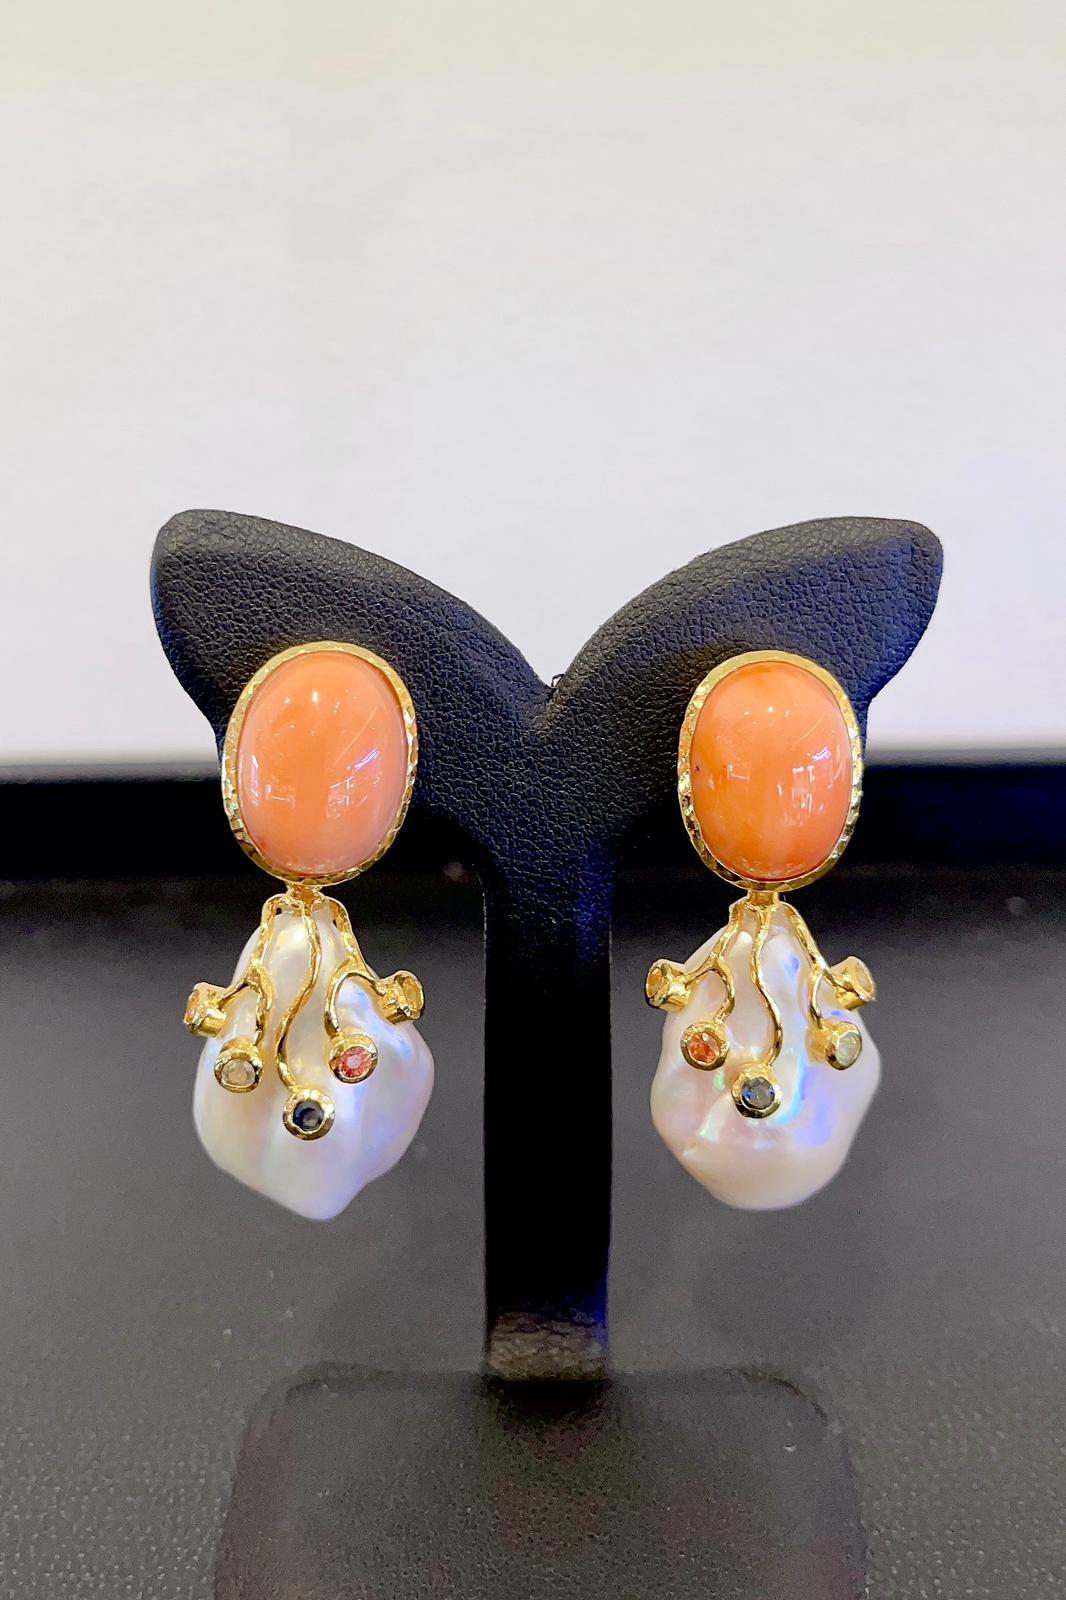 Baroque Revival Bochic “Capri” Coral and Fancy Color Sapphire Earrings